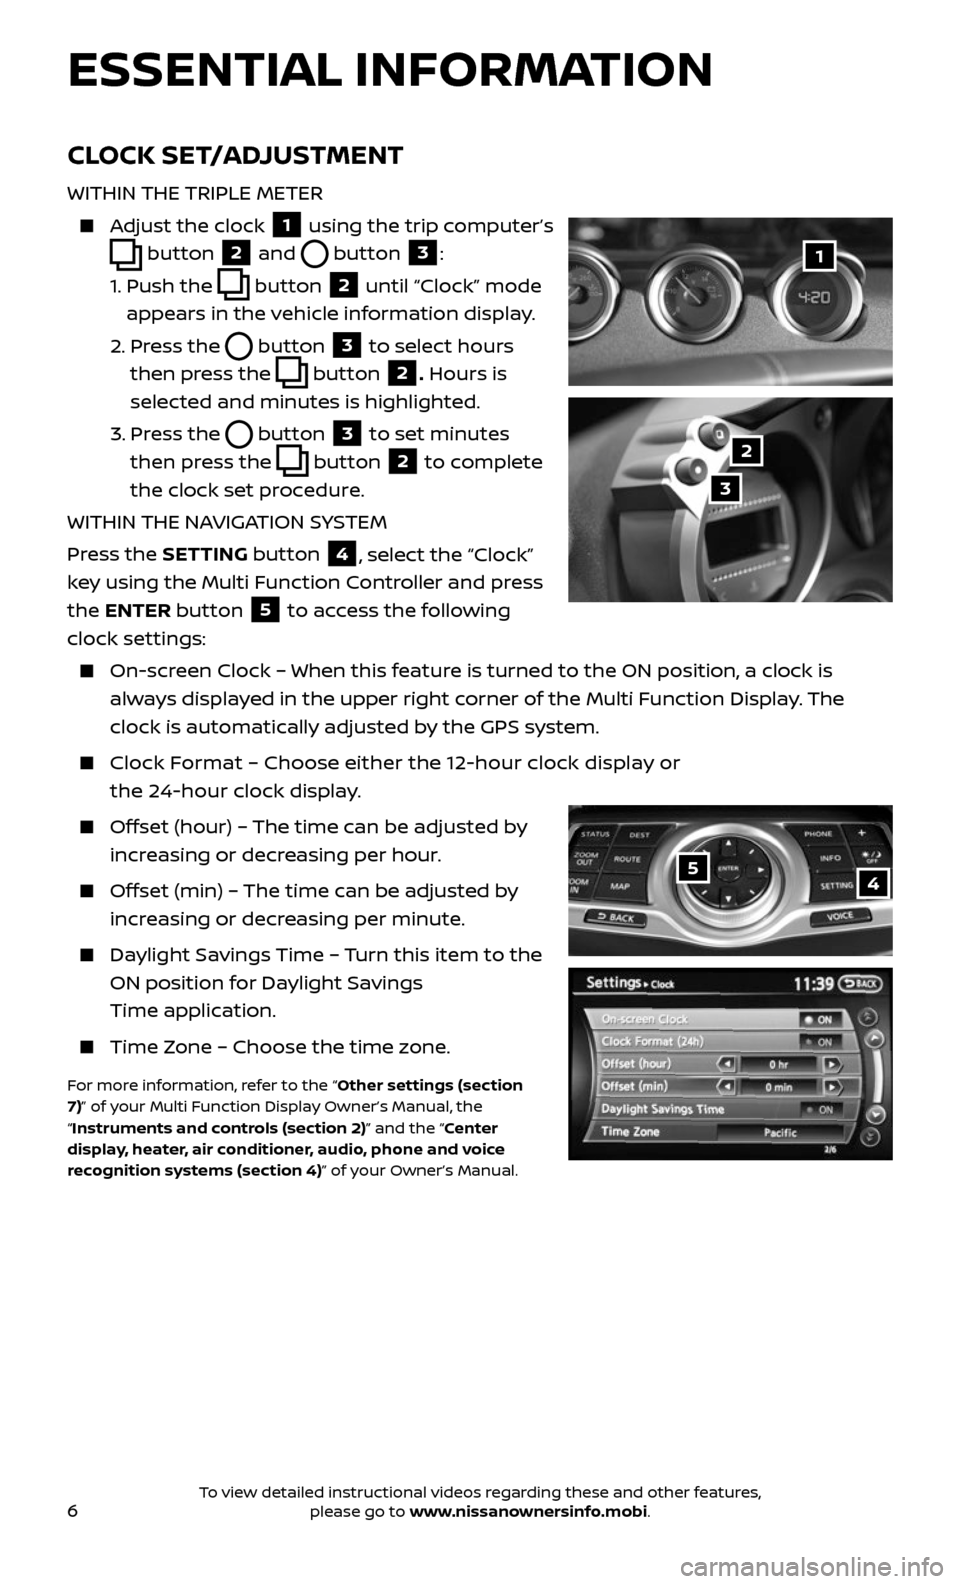 NISSAN 370Z ROADSTER 2017 Z34 Quick Reference Guide 6
ESSENTIAL INFORMATION
54
CLOCK SET/ADJUSTMENT
WITHIN THE TRIPLE METER
    Adjust the clock 1 using the trip computer’s 
 button 2 and  button 3:
   1.  Push the  button 2 until “Clock” mode 
a